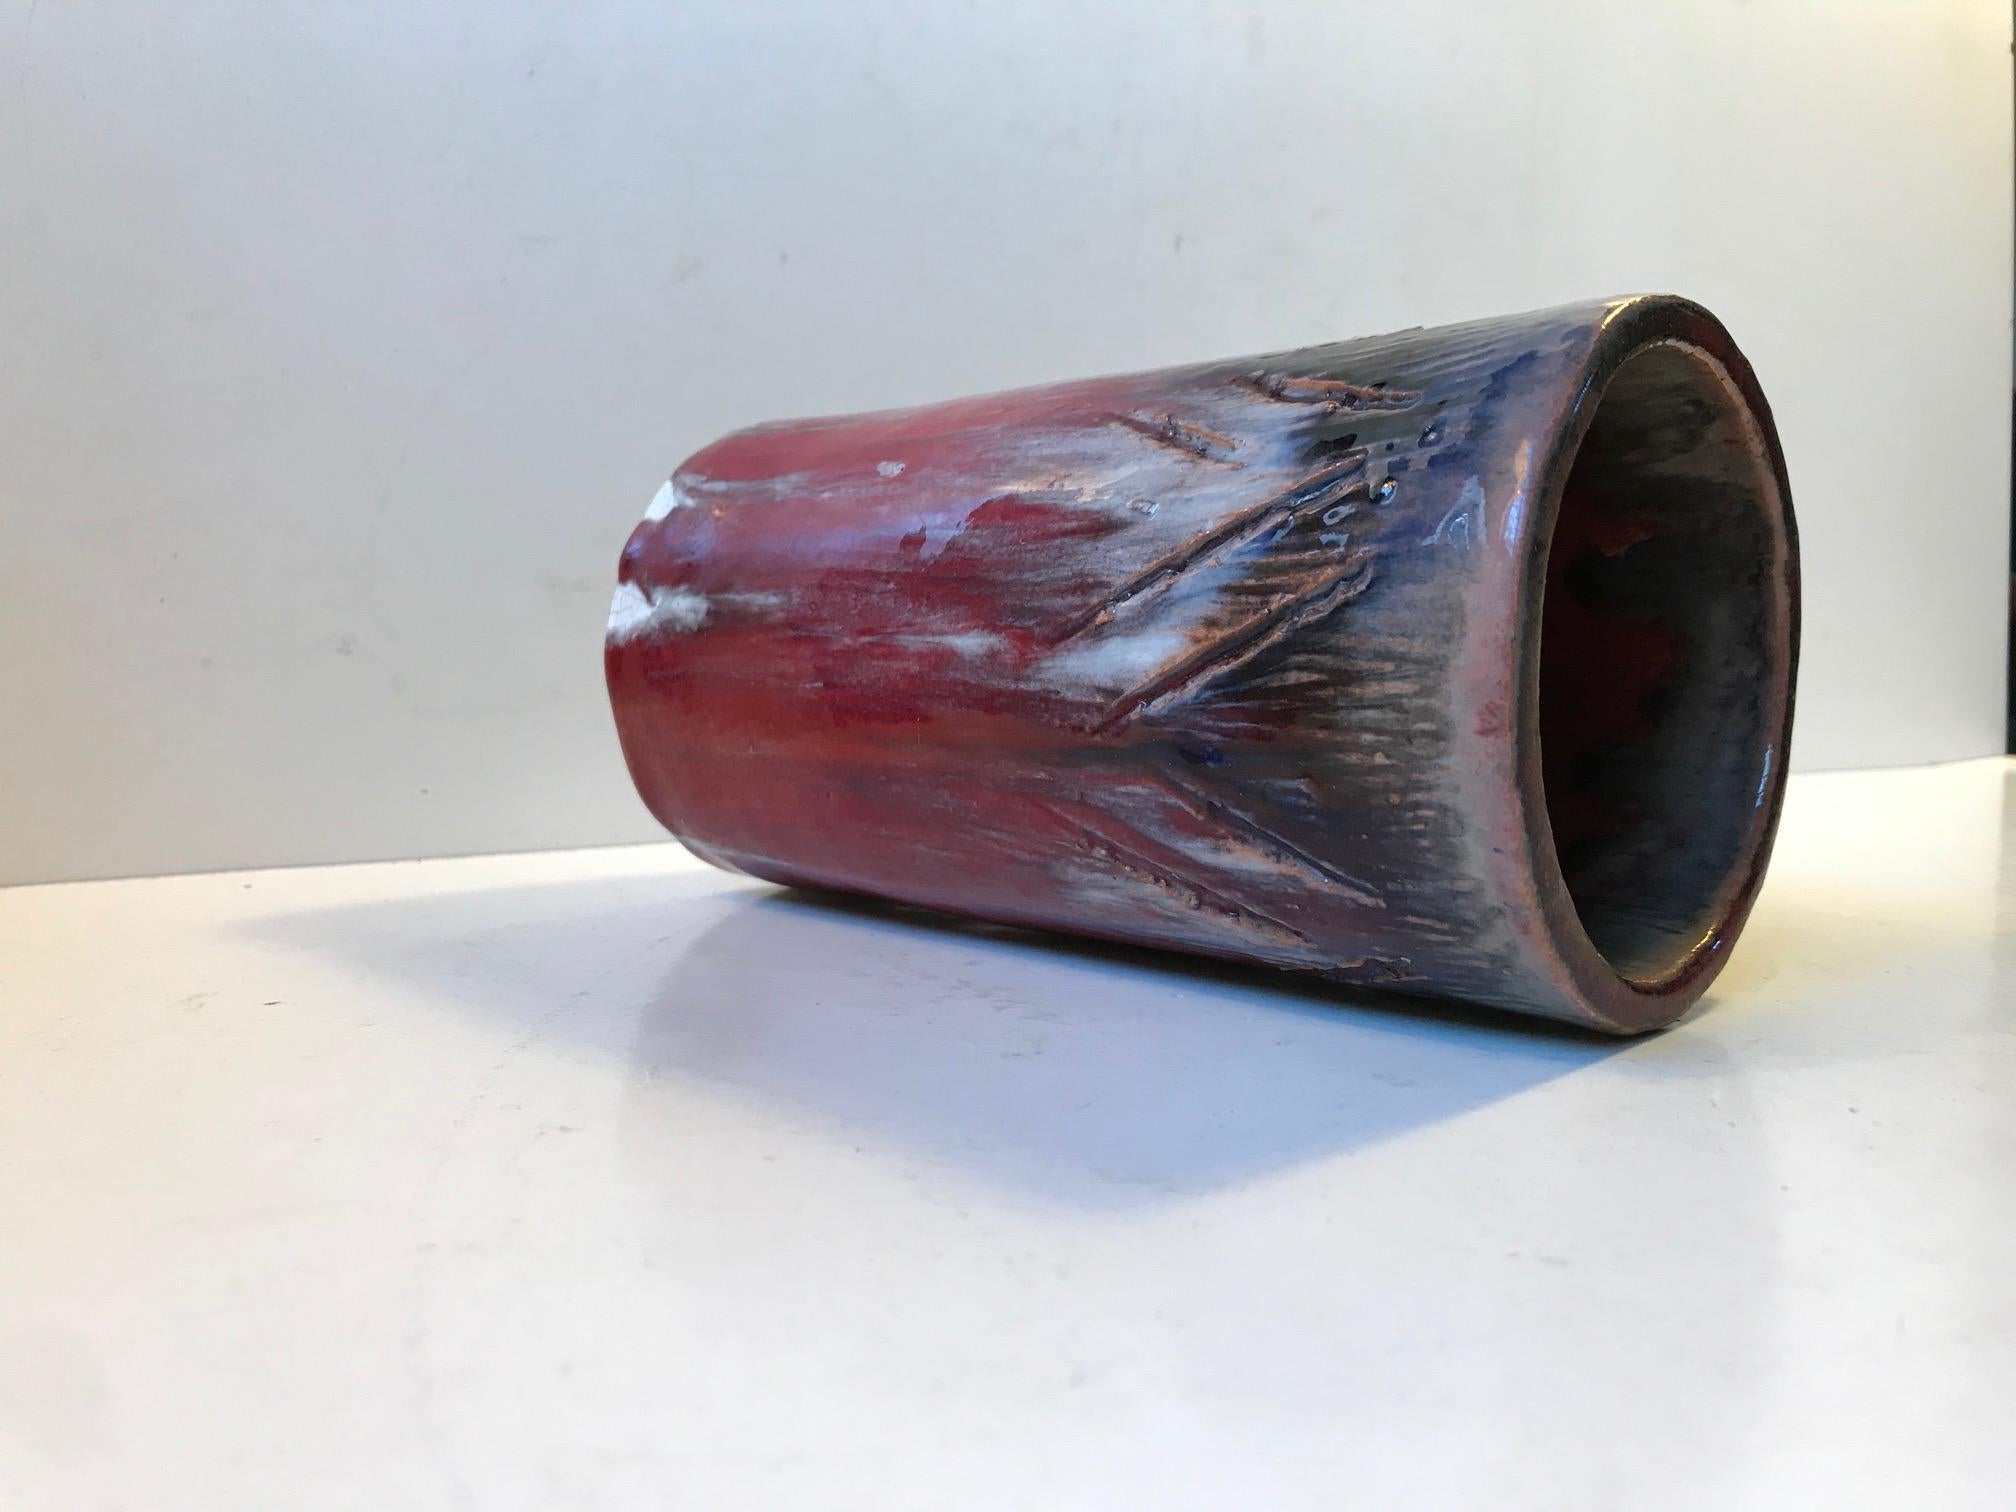 Unique cylindrical ceramic vase with a powerful and dramatic expression created by the use of oxblood-, white drip glaze and highlighted by the use shallow and deep unsymmetrical free-hand incisions.